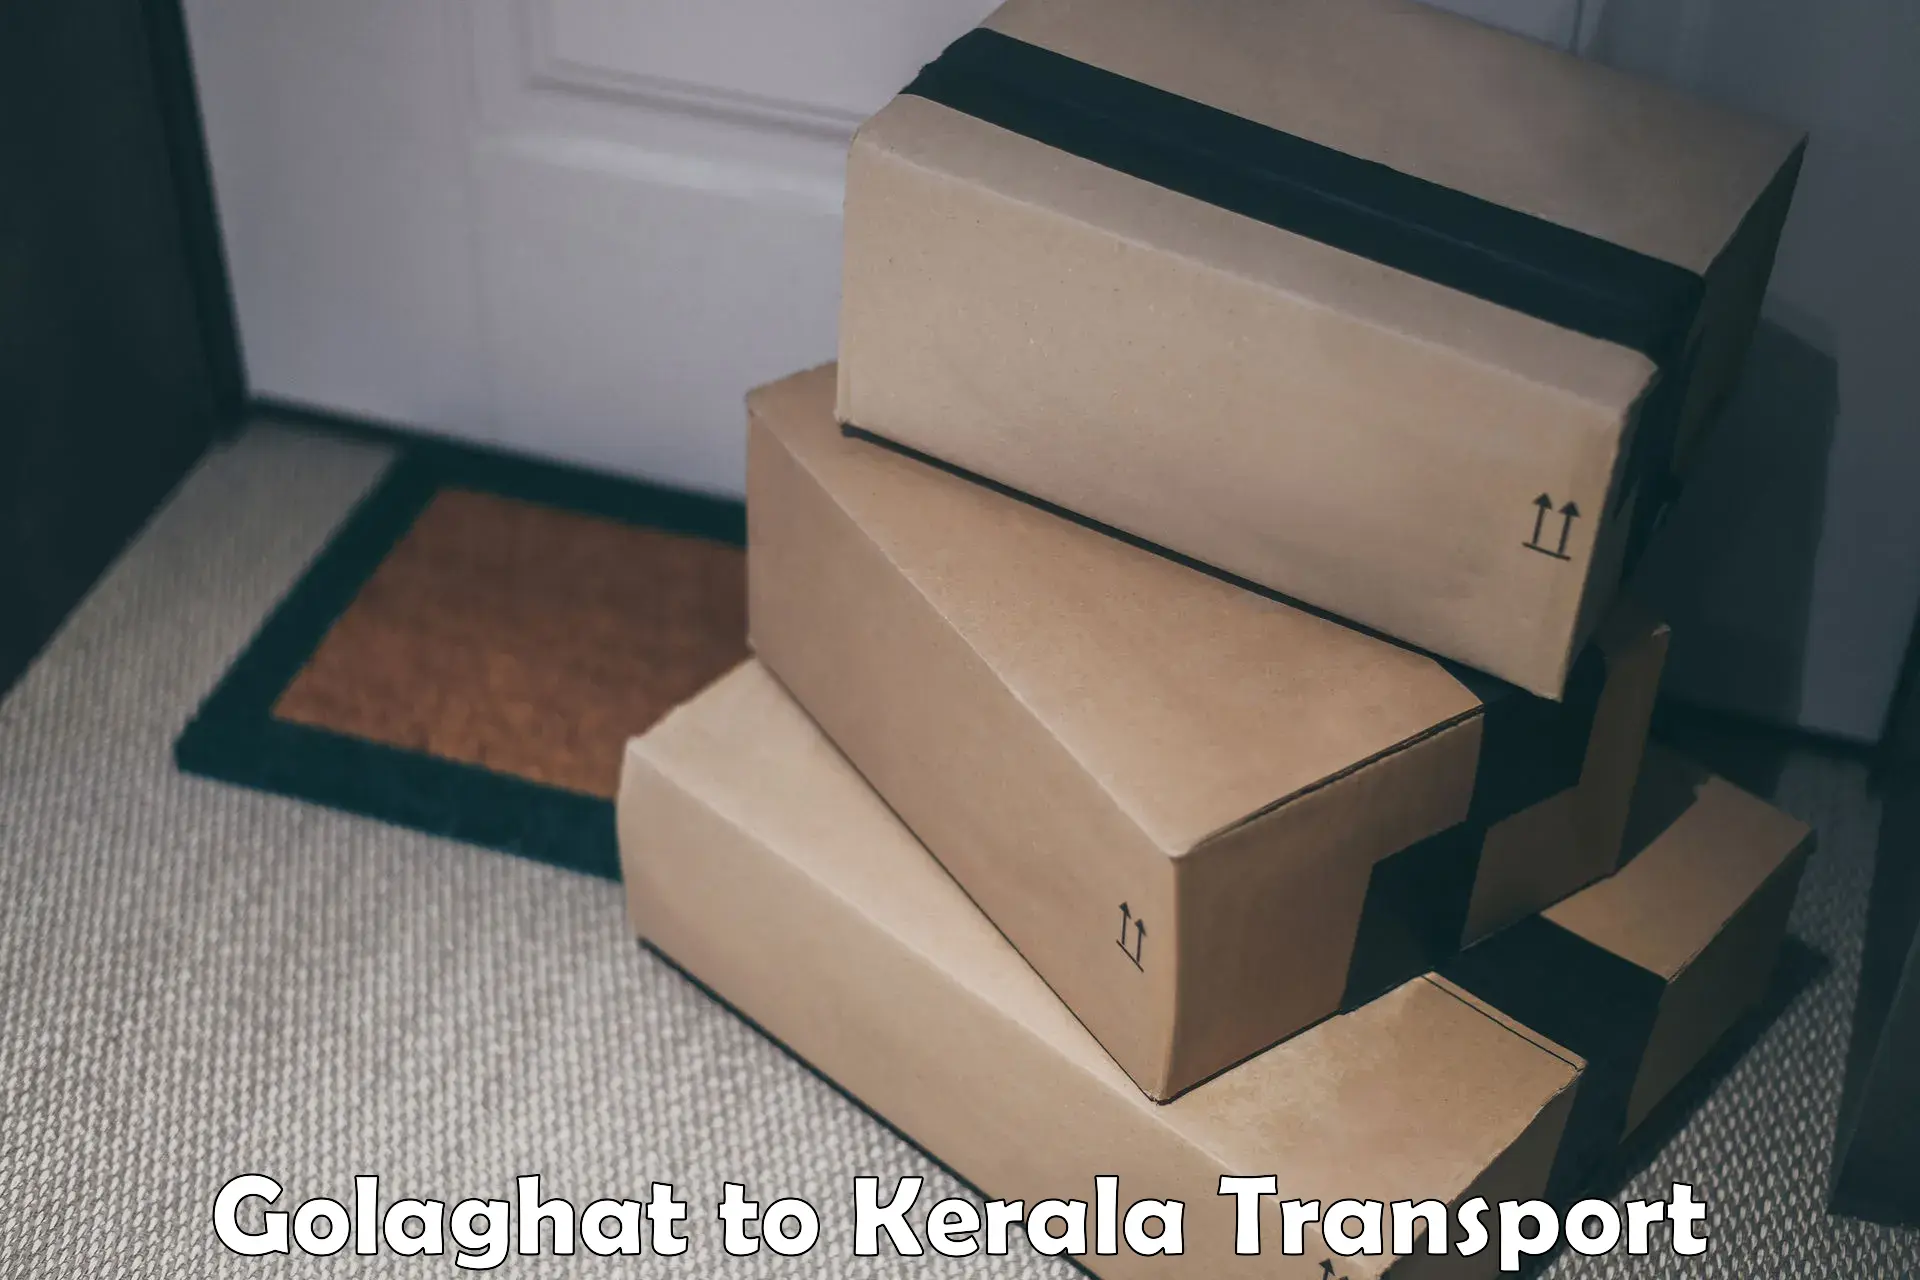 All India transport service Golaghat to Kerala